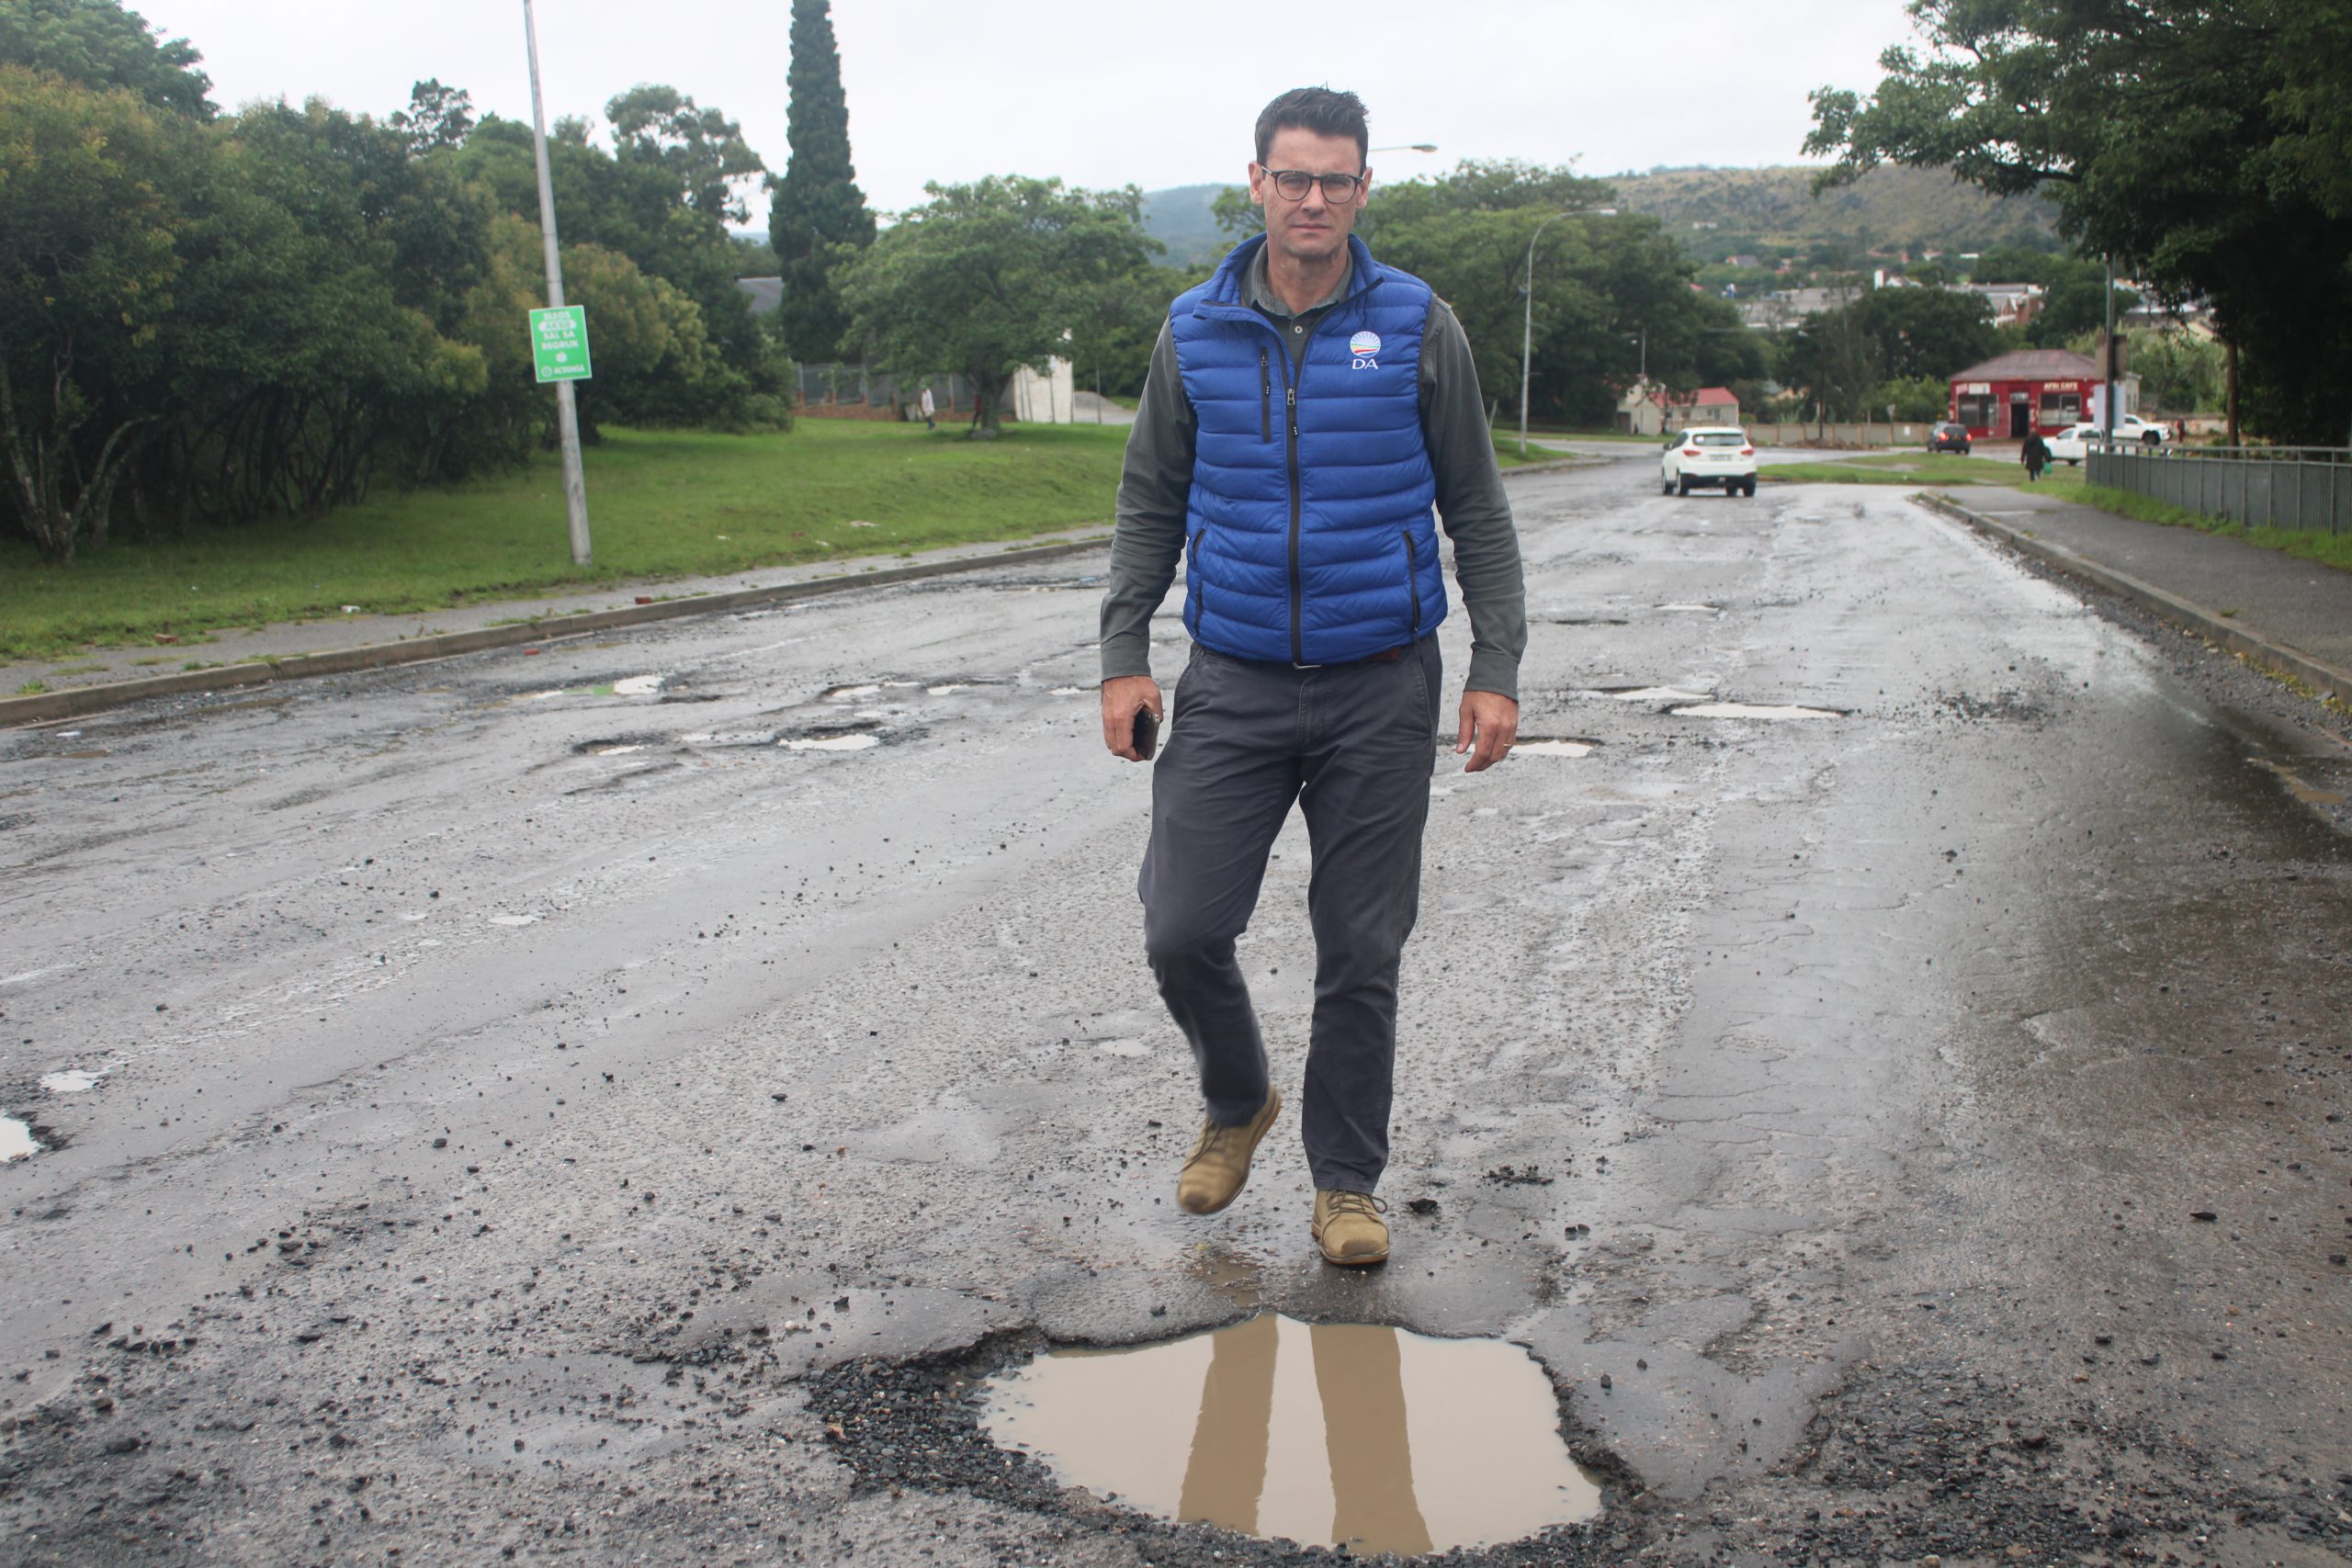 Member and a leader of DA after inspecting a pot hole filled with water.